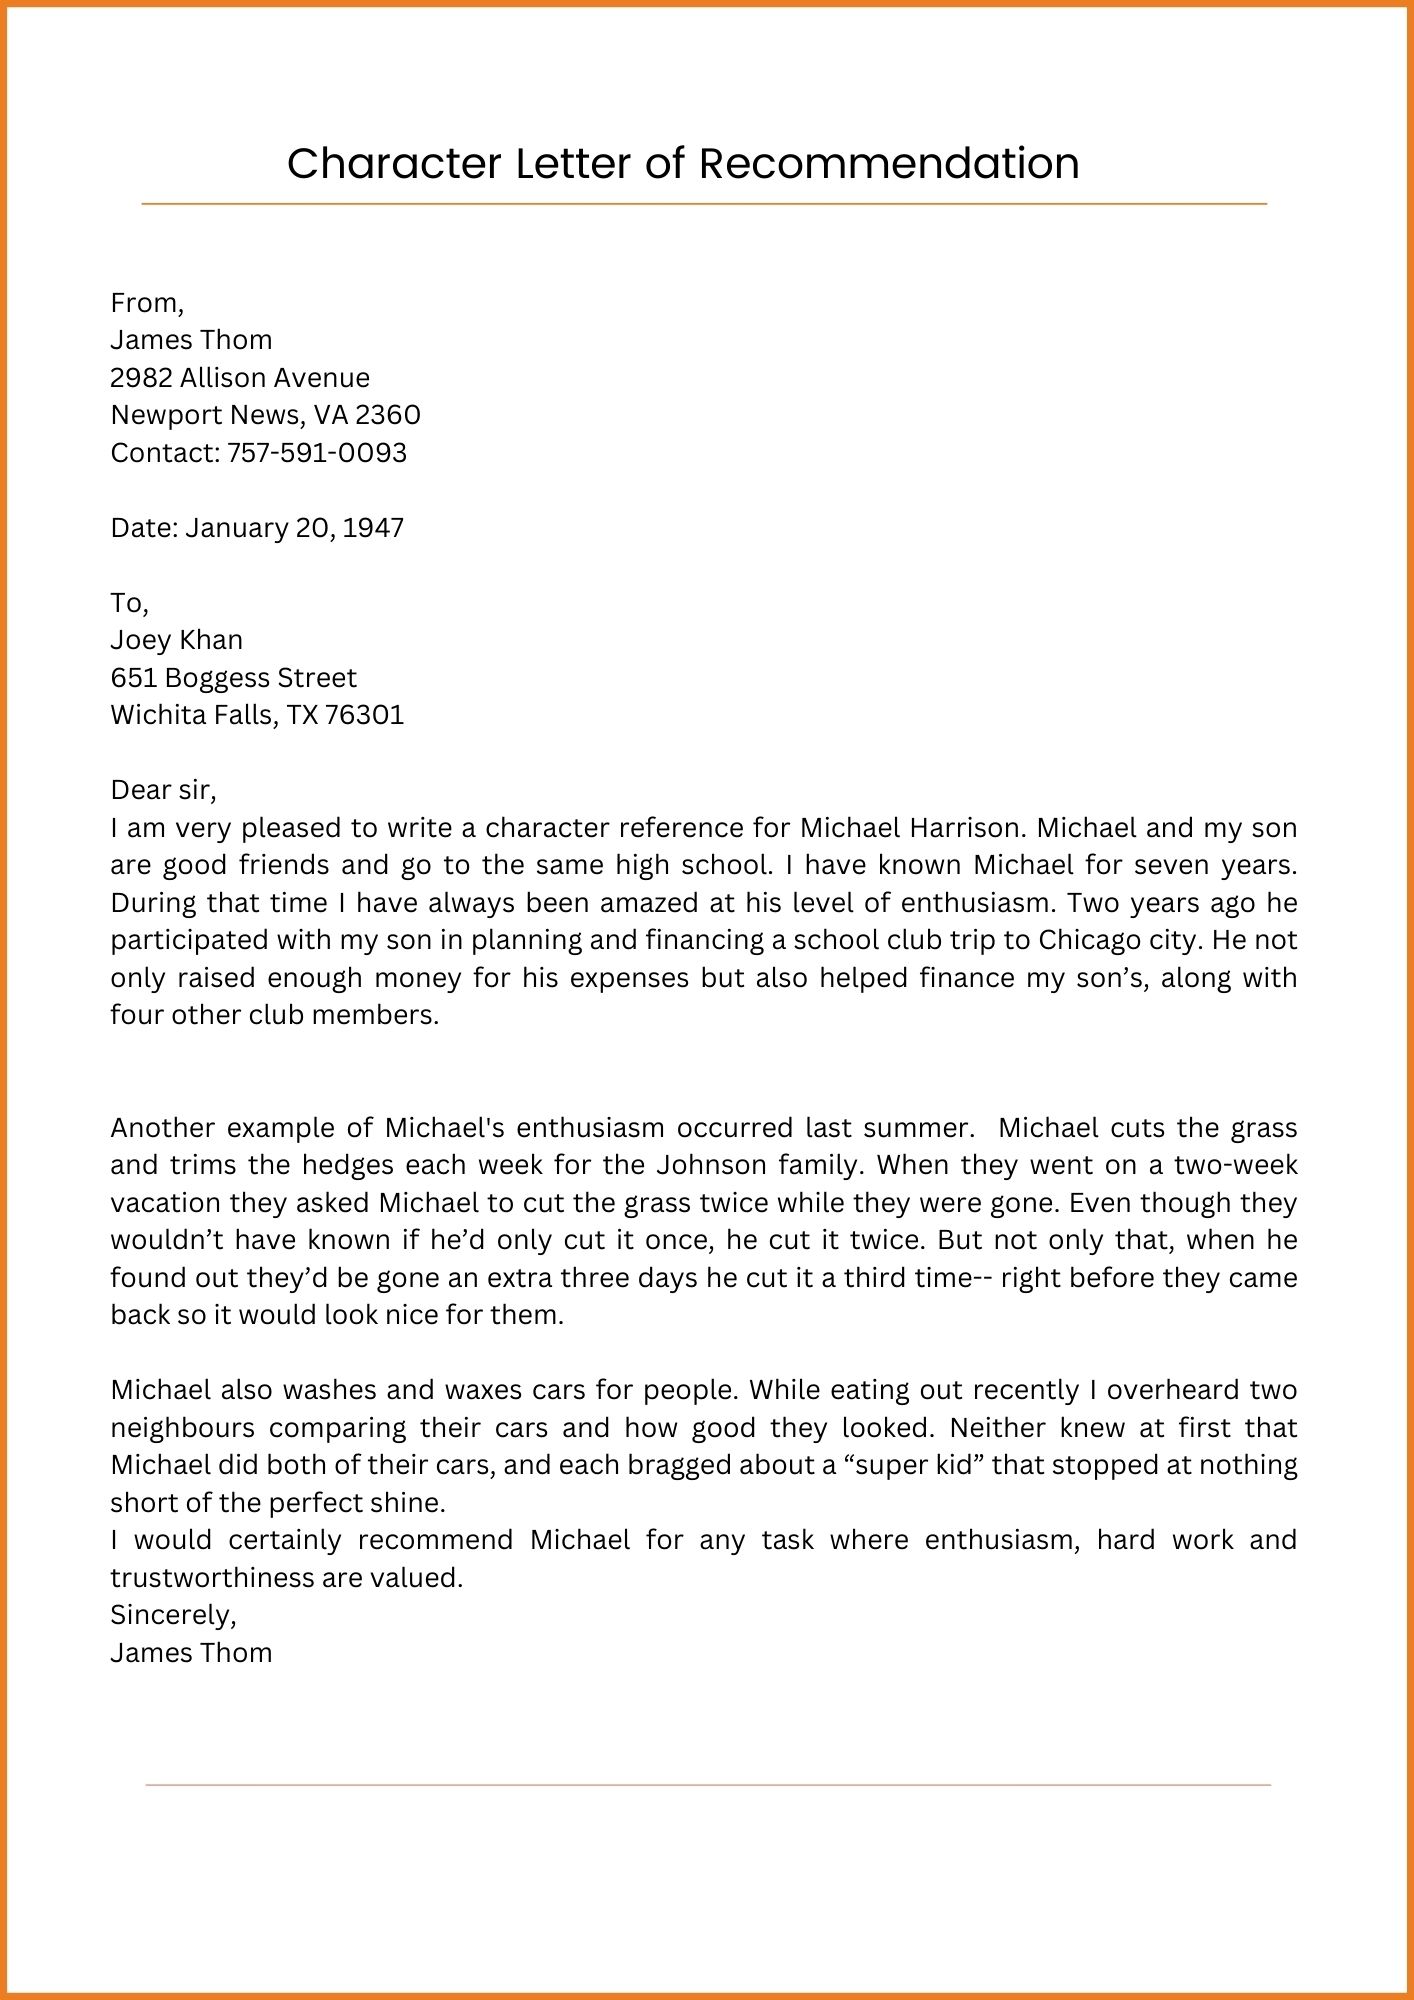 Letter of Recommendation for Character Template